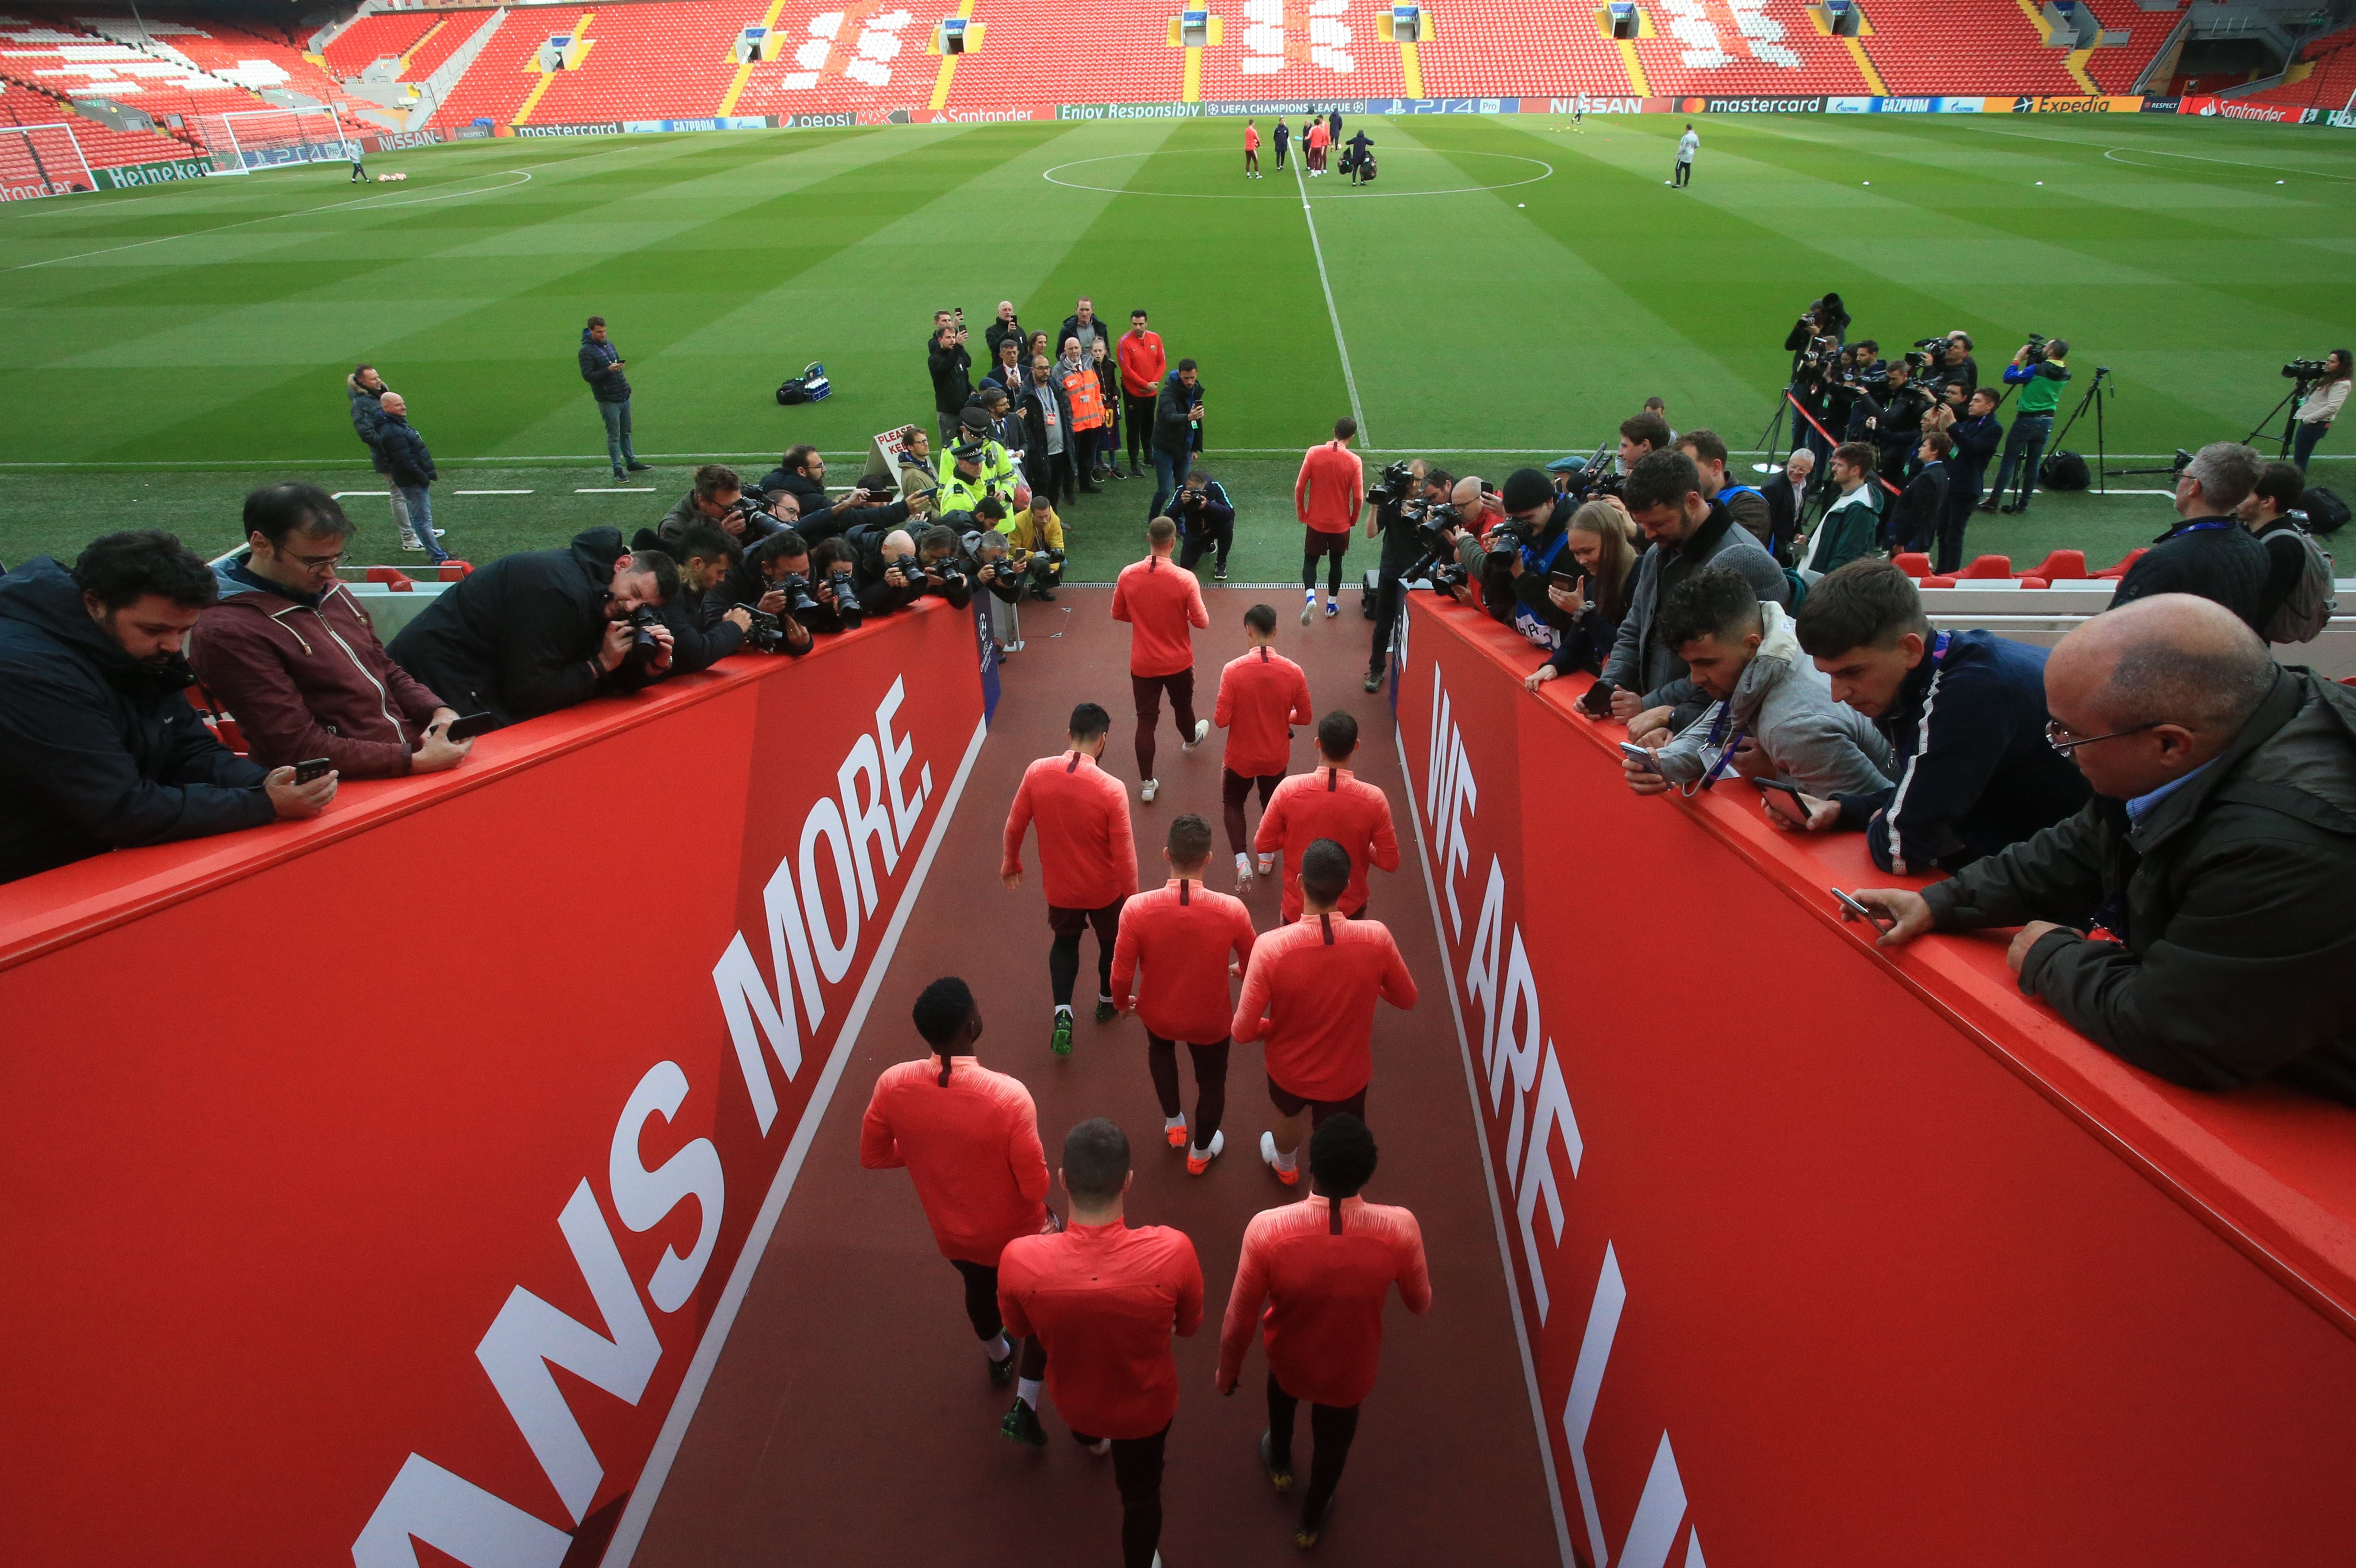 Barcelona players come out for a training session at Anfield stadium in Liverpool, north west England on on May 6, 2019, on the eve of their UEFA Champions League semi-final second leg football match against Liverpool. (Photo by Lindsey PARNABY / AFP)        (Photo credit should read LINDSEY PARNABY/AFP/Getty Images)